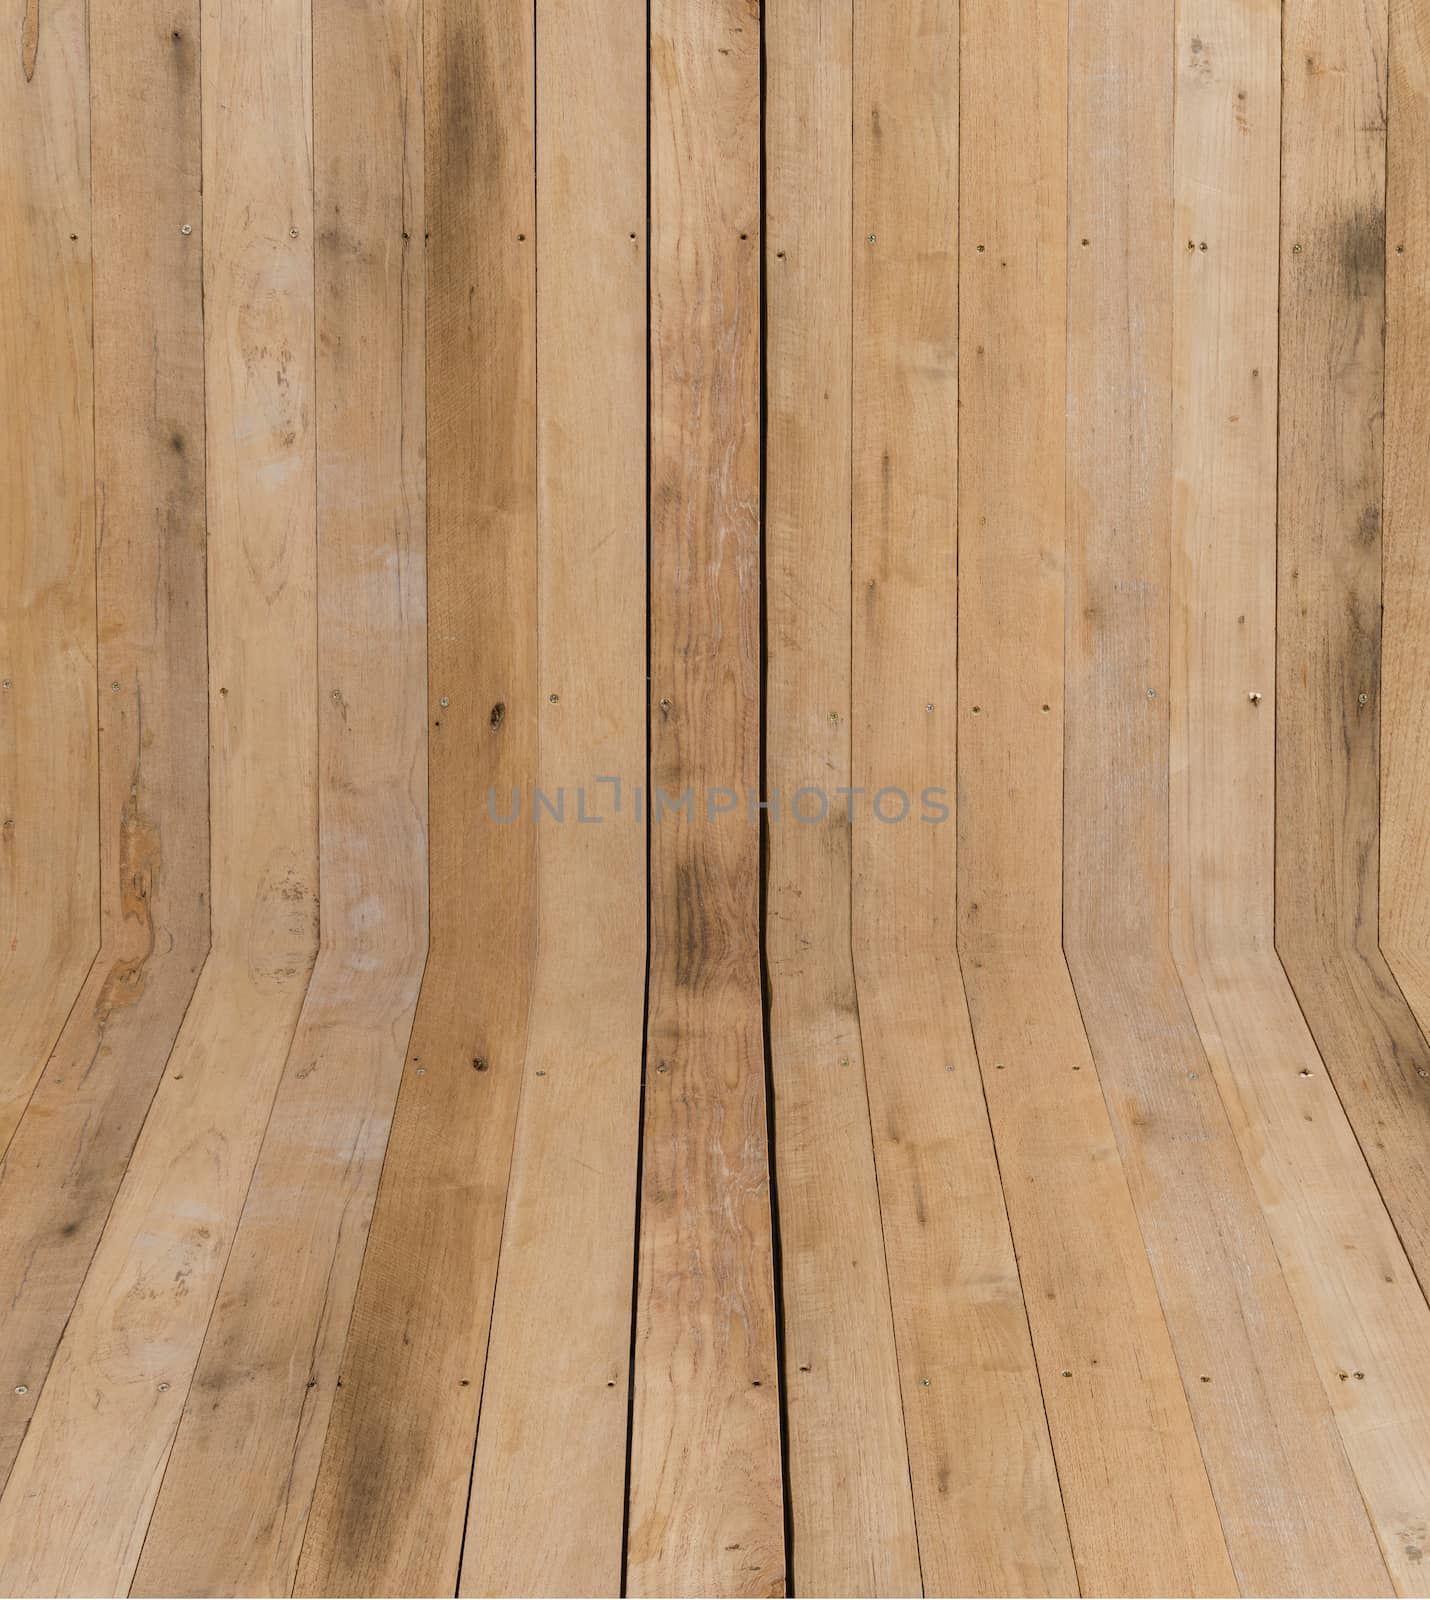 Wood texture background by nopparats